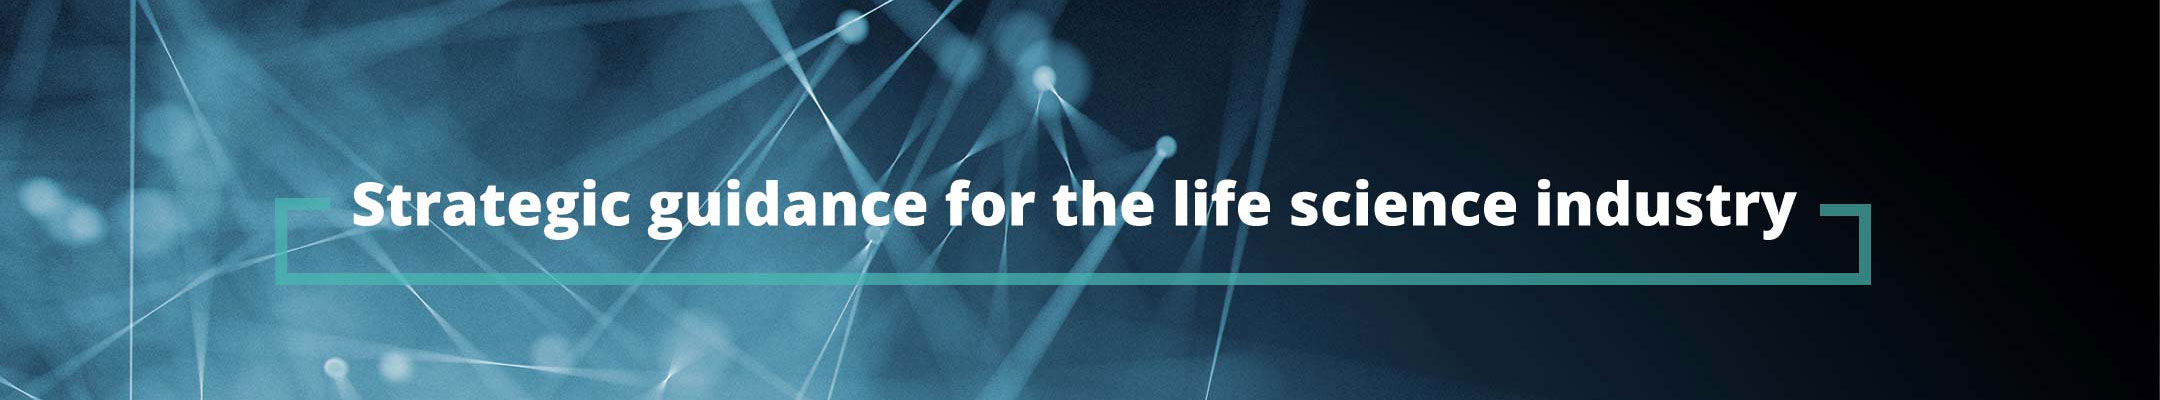 Strategic guidance for the life science industry